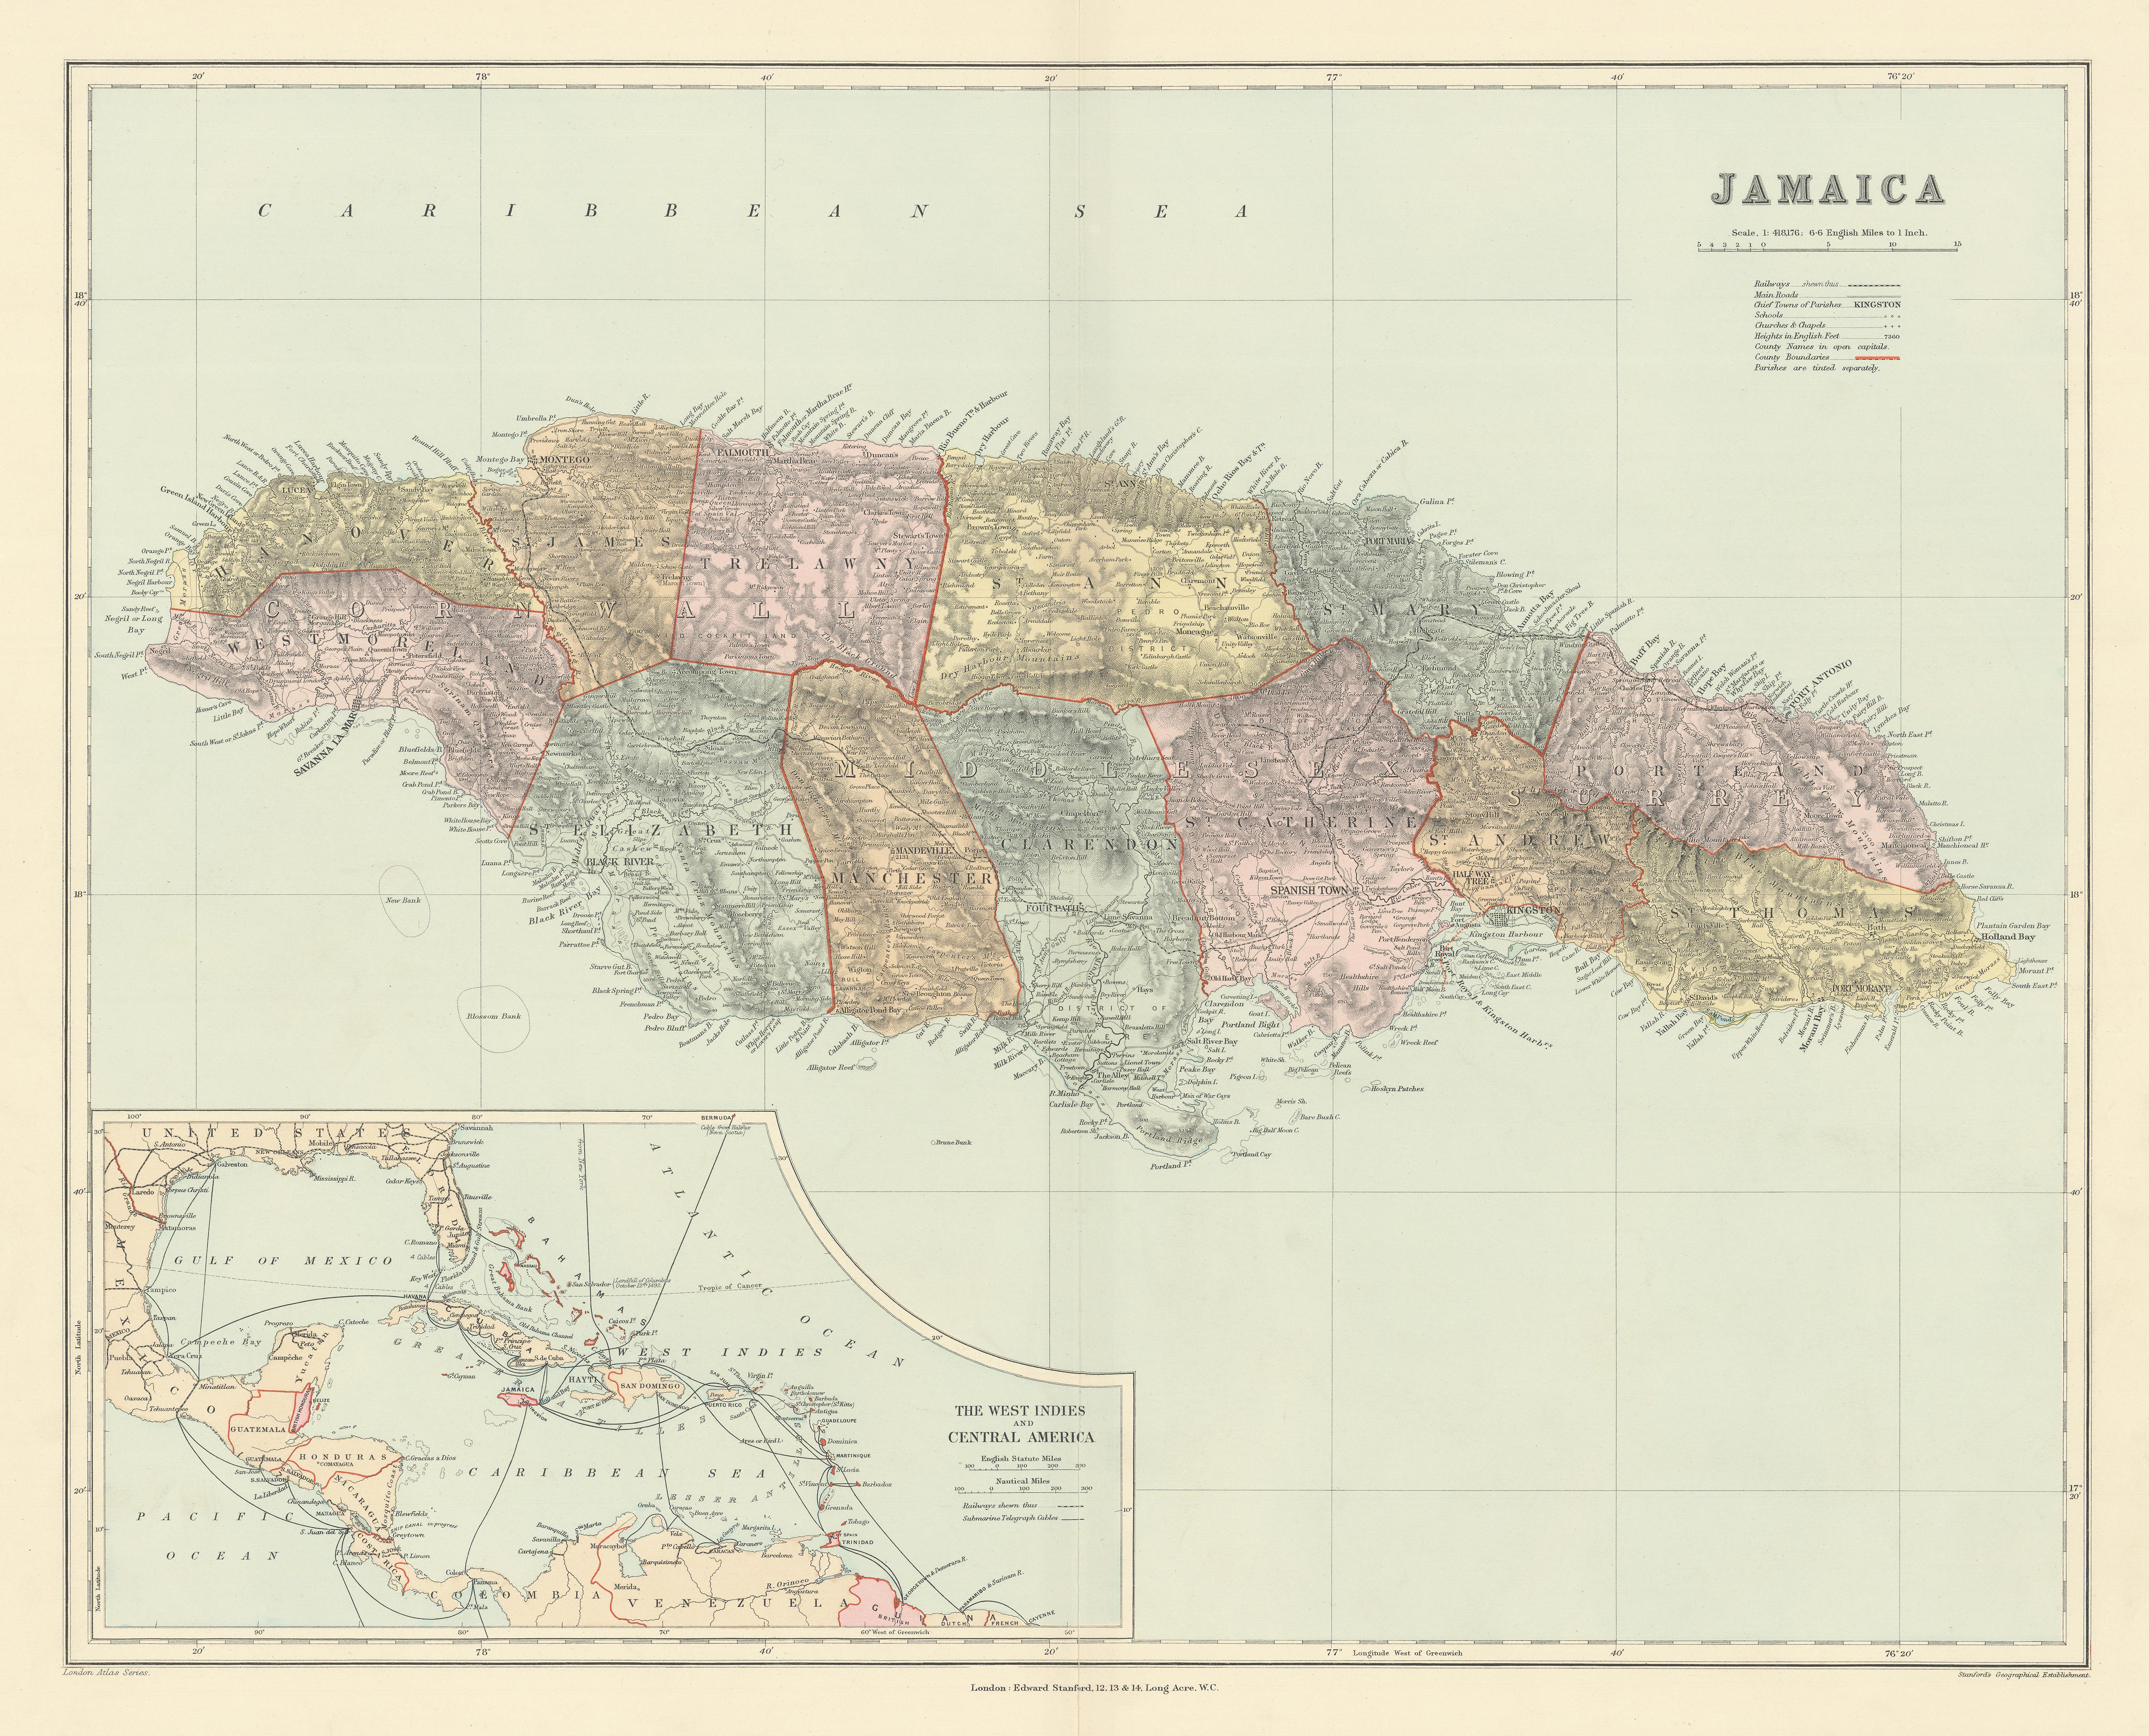 Jamaica, in parishes. West Indies telegraph cables. 51x63cm. STANFORD 1904 map